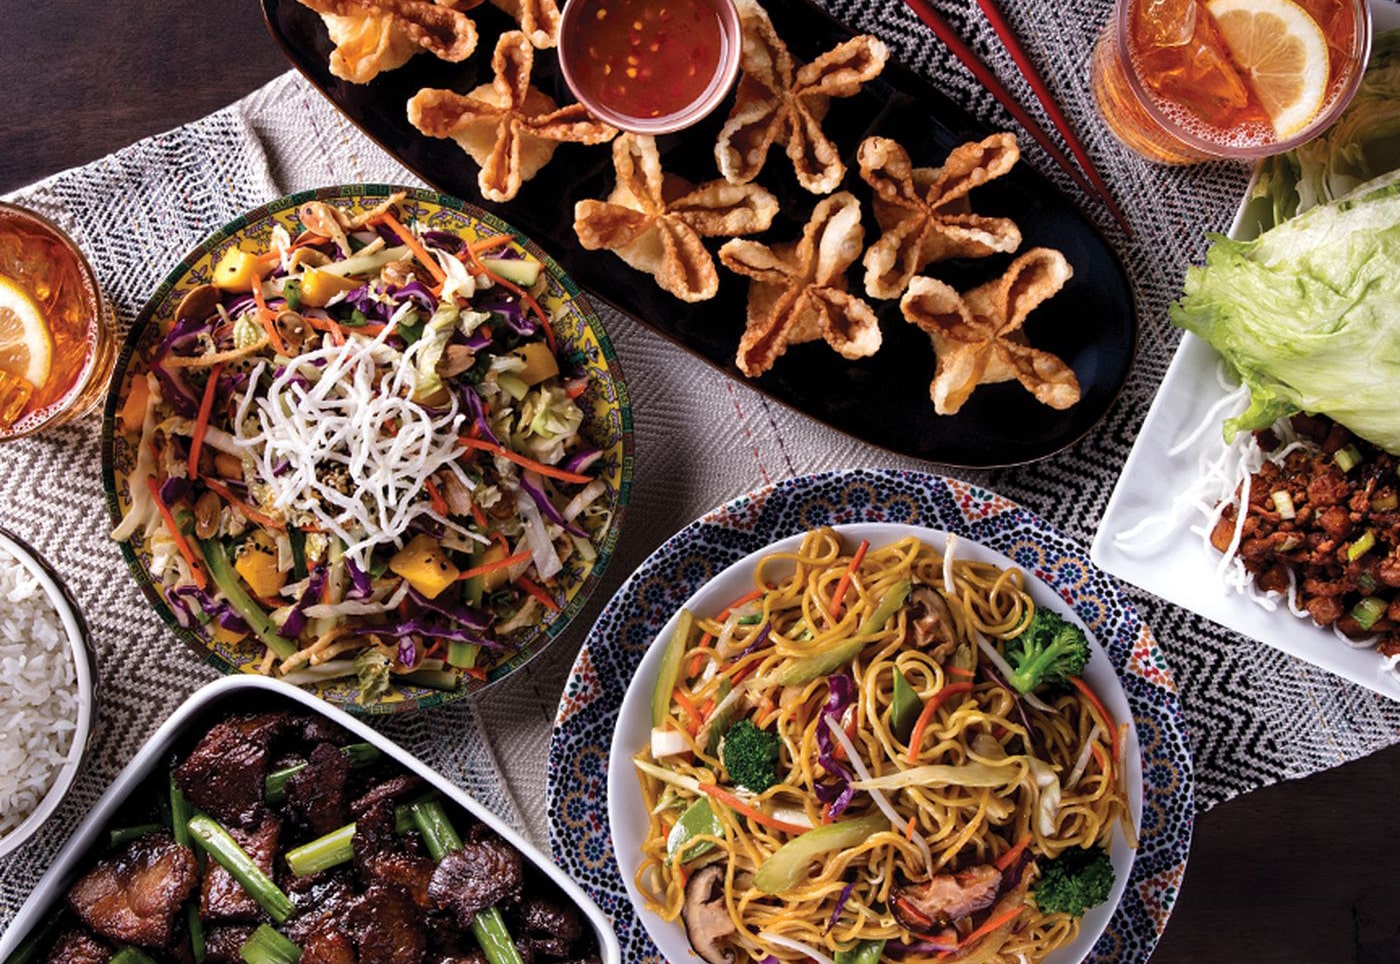 P.F. Chang's opening 4 new restaurants in Colorado